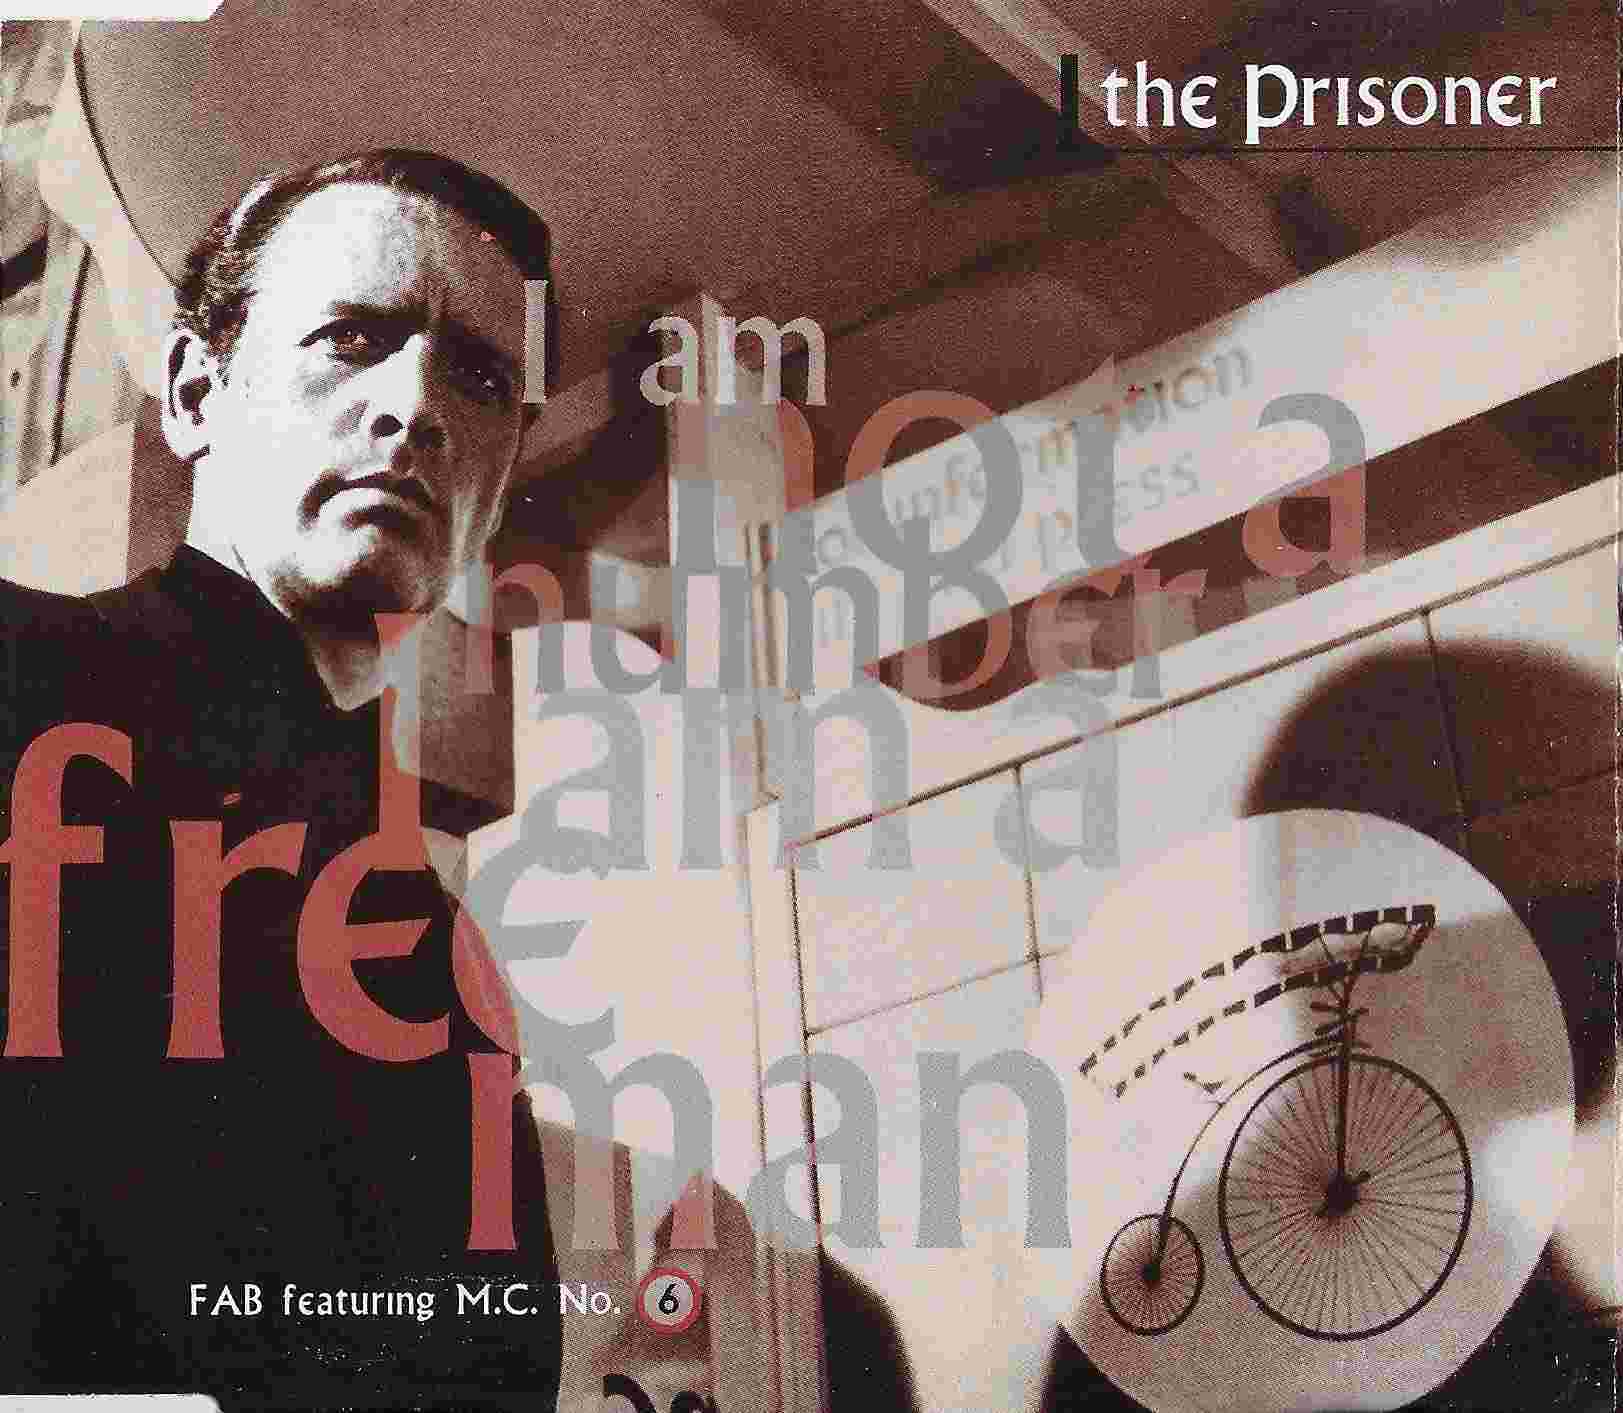 Picture of The prisoner (Free man mix) by artist Ron Grainer / F. A. B. from ITV, Channel 4 and Channel 5 cdsingles library